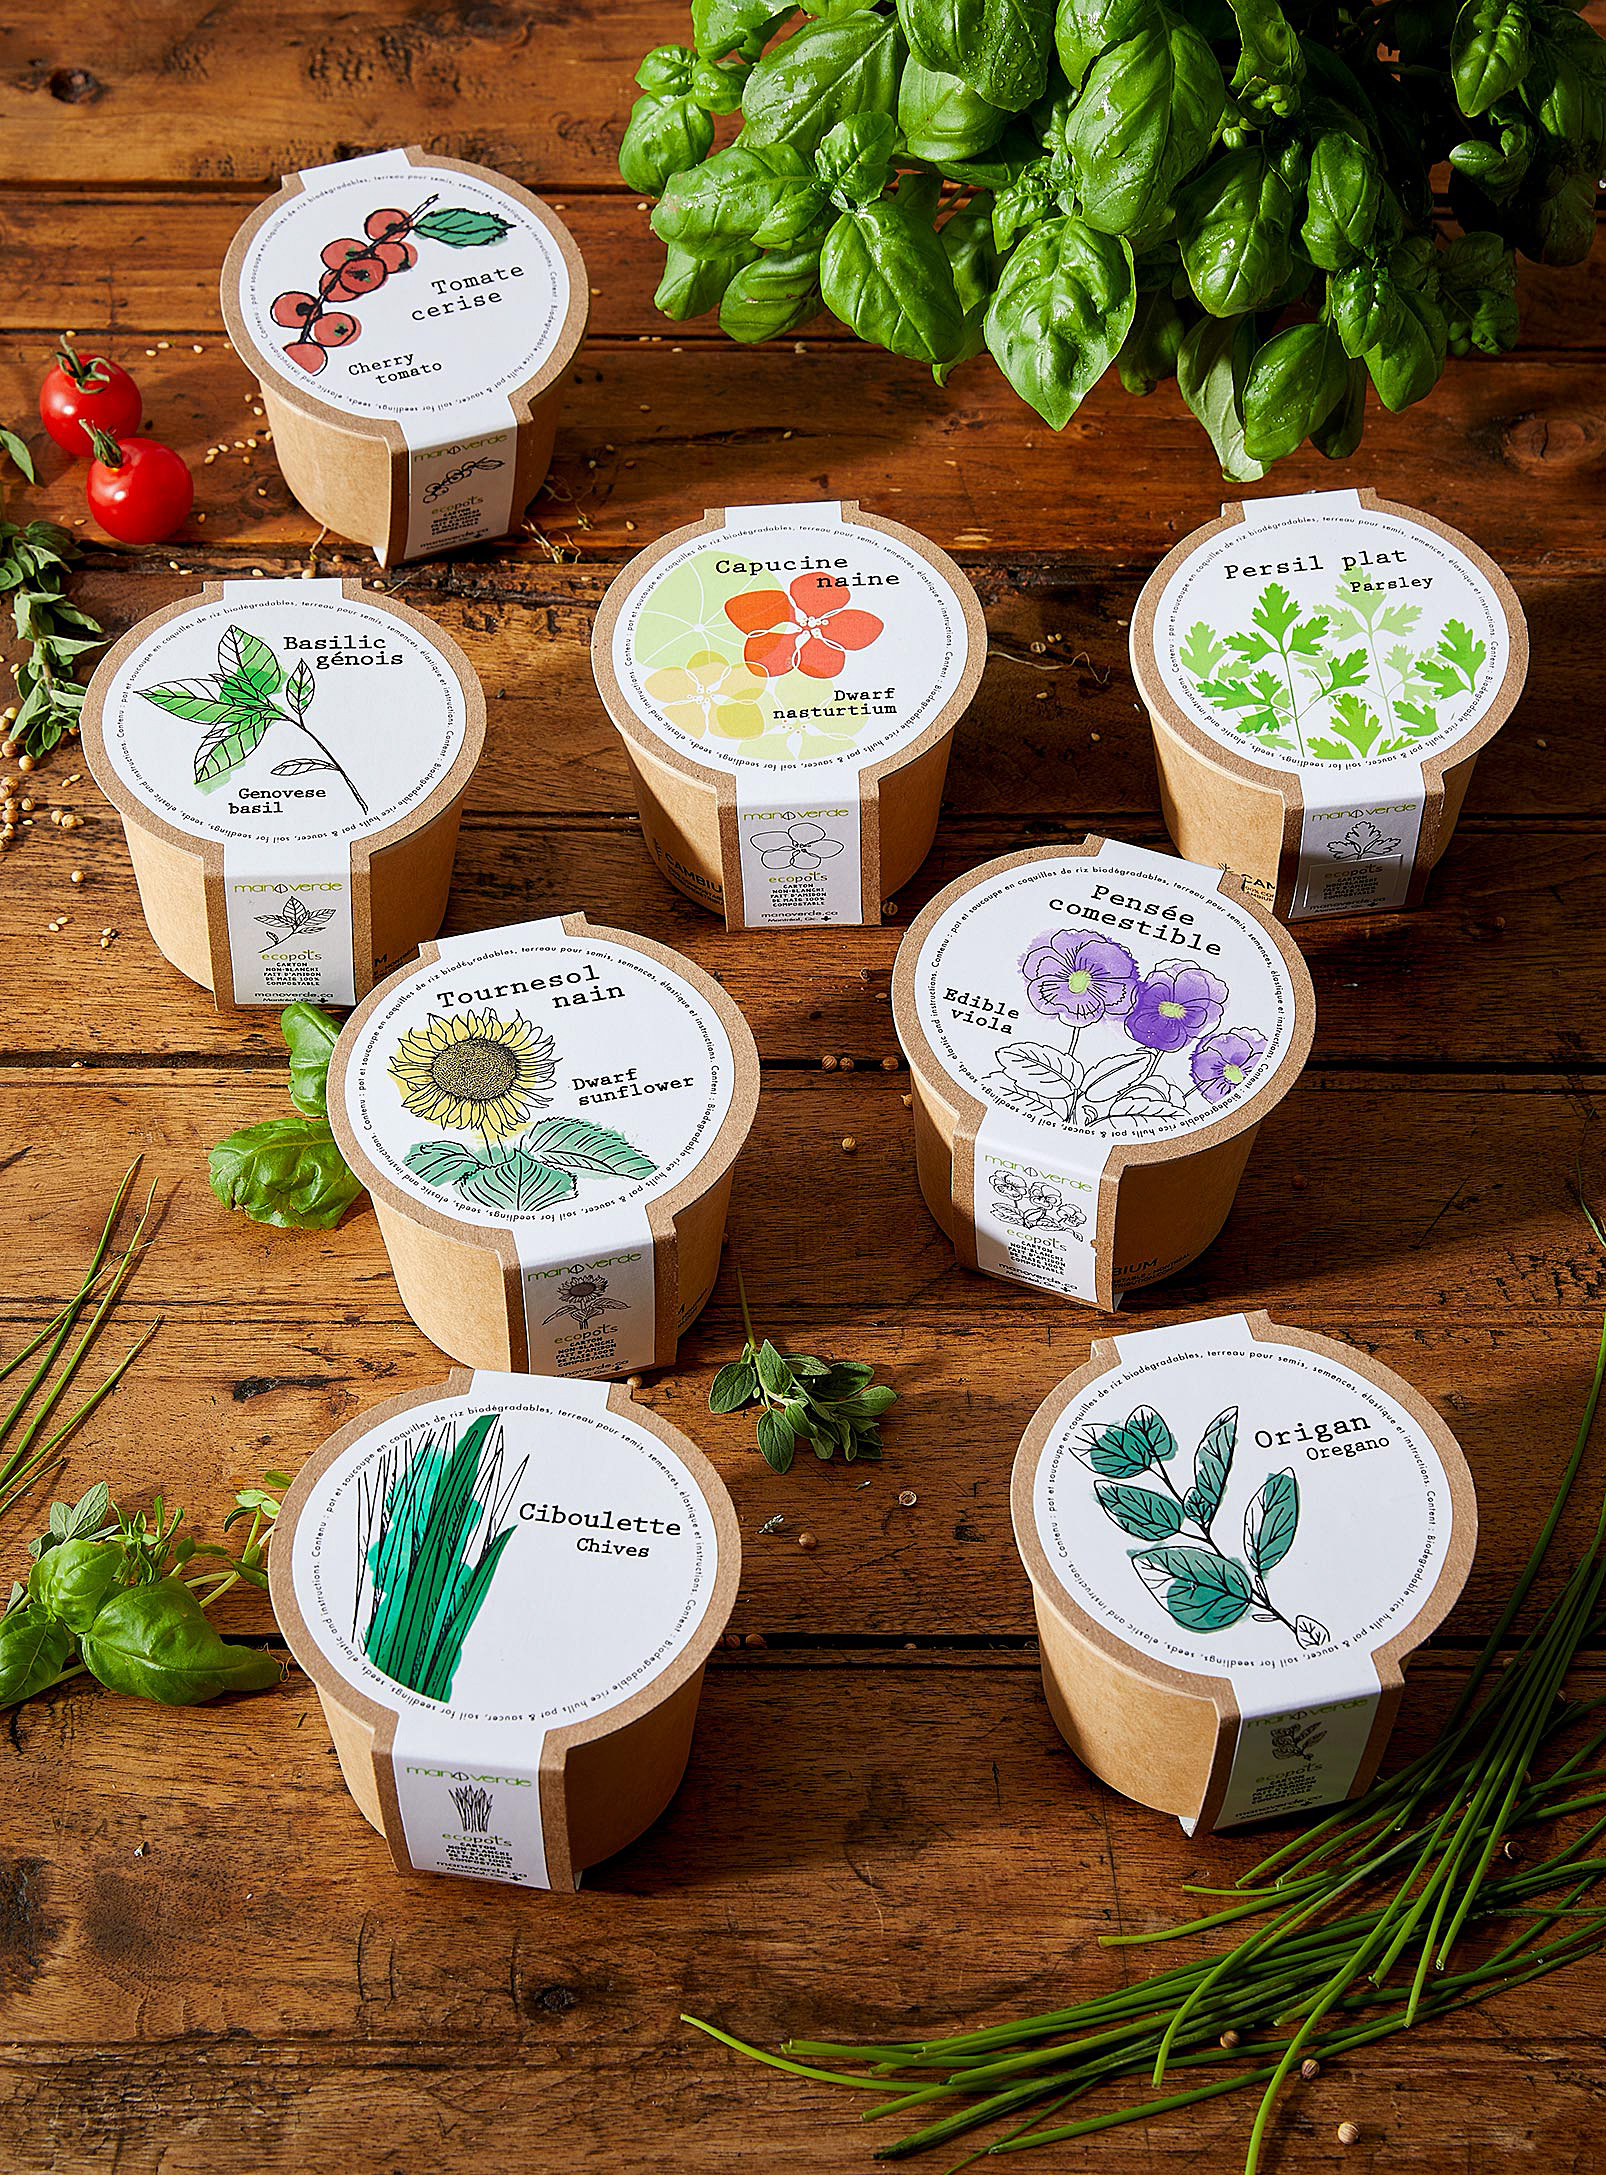 Mano verde - Flowers and herbs to grow 8 eco-friendly mini pots set